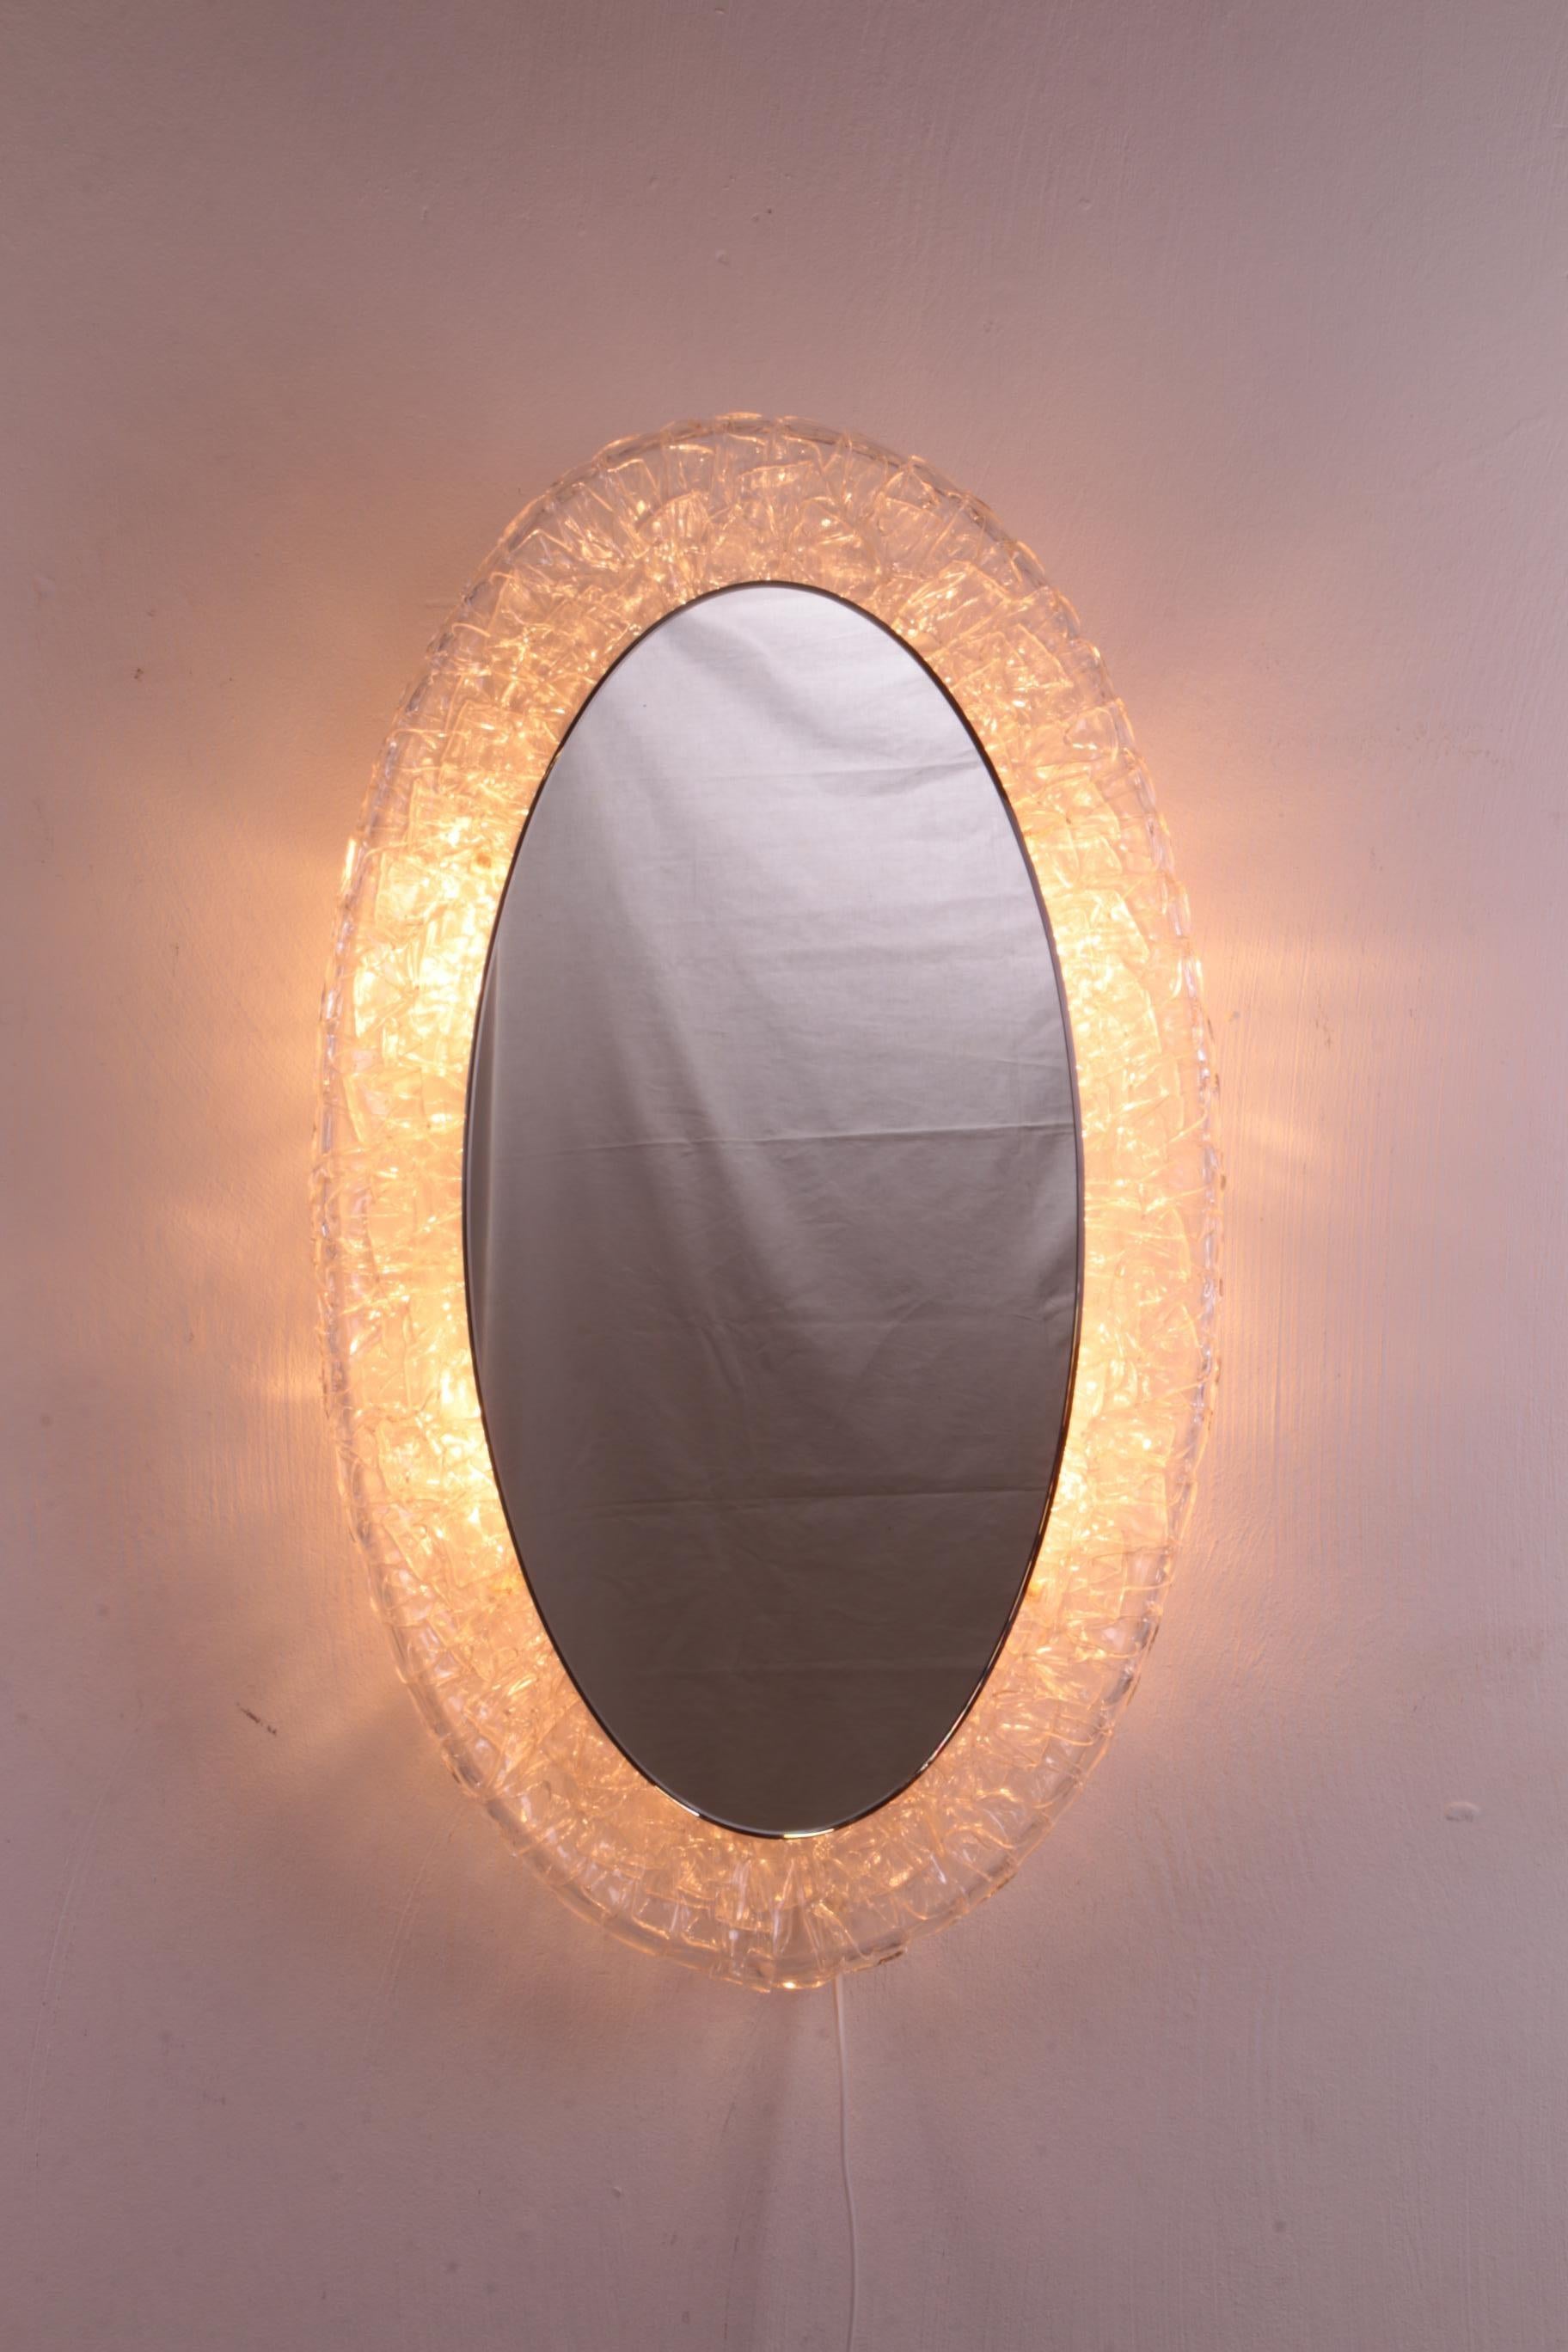 Mid-Century Modern Large Oval Plexiglas Mirror with Lighting, 1960, Germany For Sale